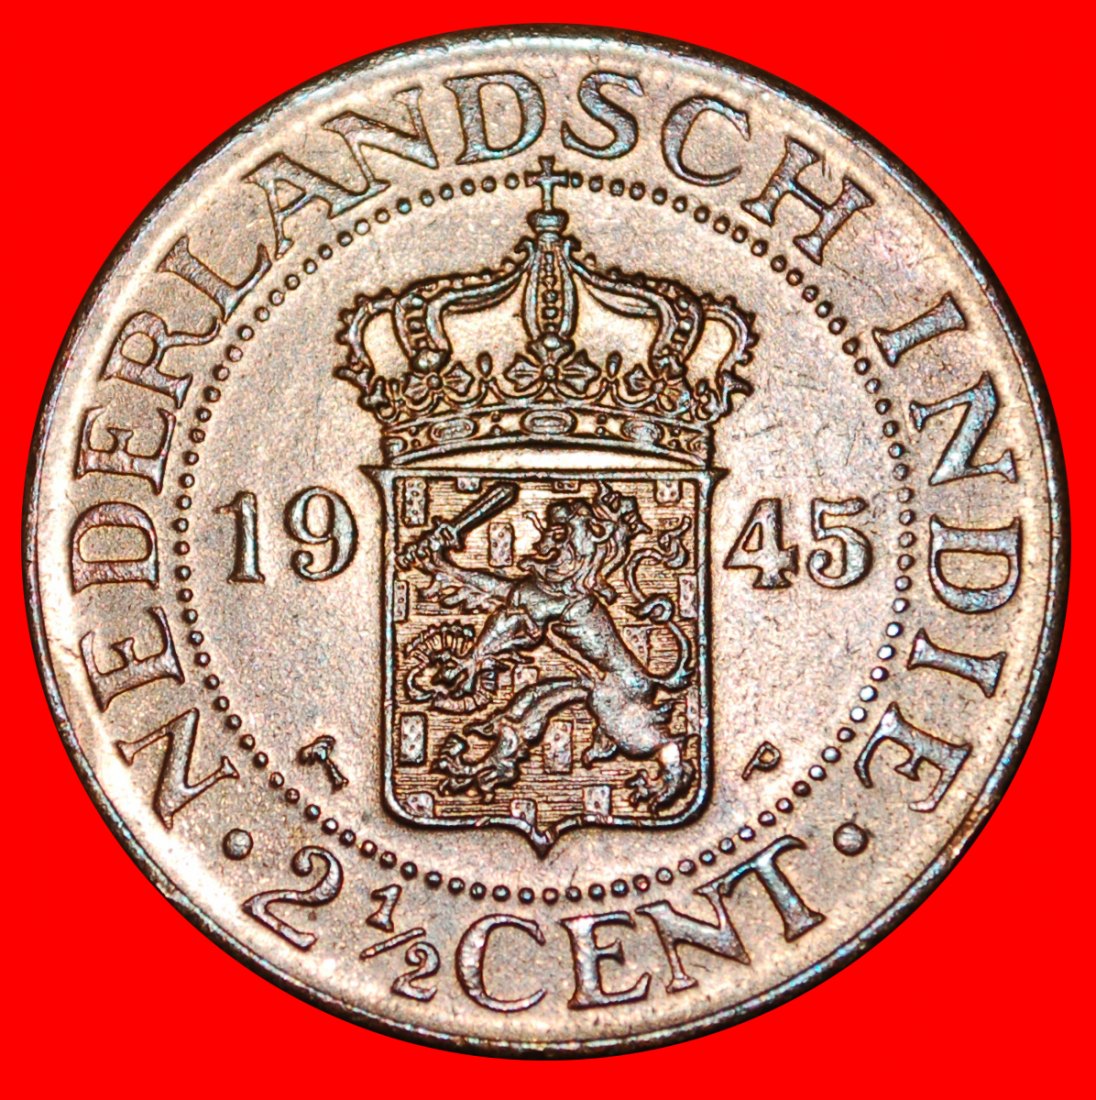  * USA TYPE 1936-1945: NETHERLANDS EAST INDIES★2 1/2 CENTS 1945 DISCOVERY COIN★LOW START★ NO RESERVE!   